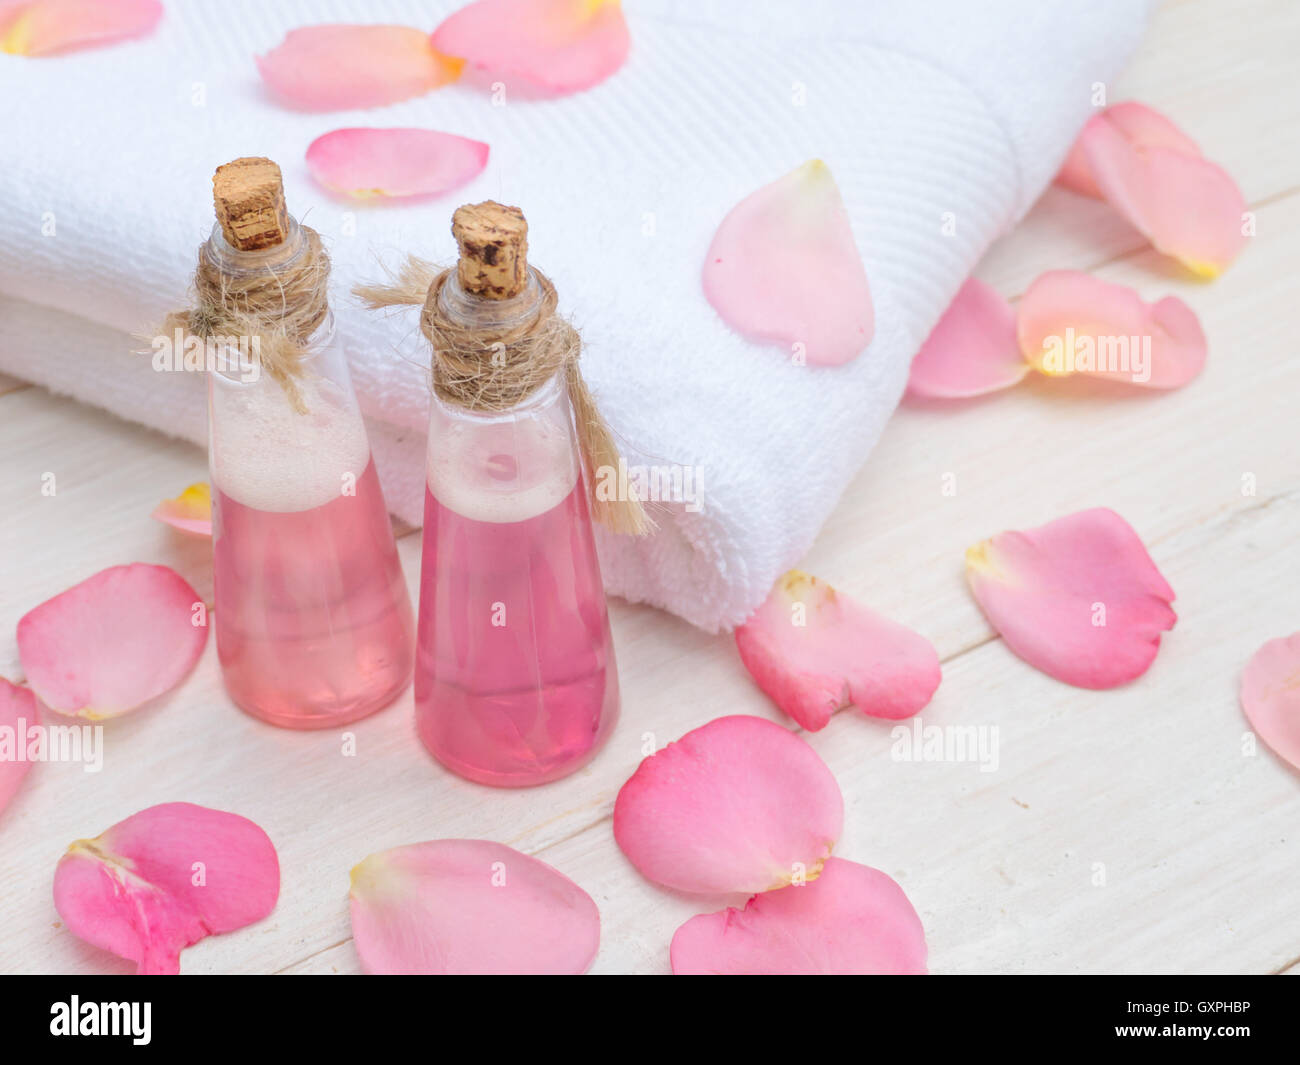 Pink shampoo in the small bottles, white towel and pink rose petals Stock Photo